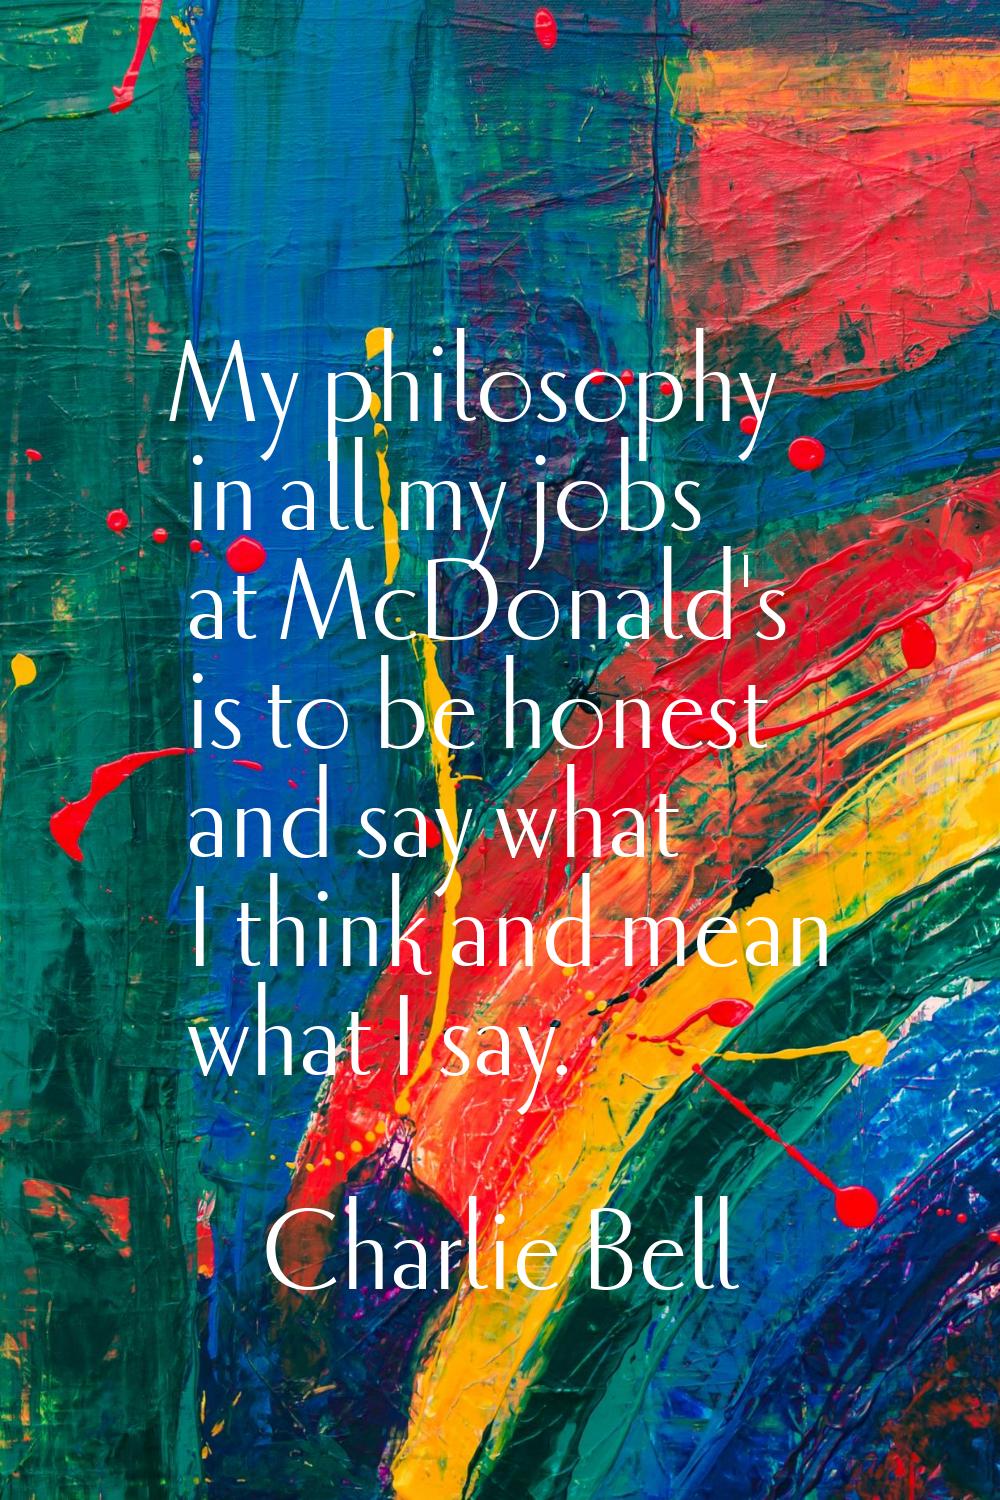 My philosophy in all my jobs at McDonald's is to be honest and say what I think and mean what I say